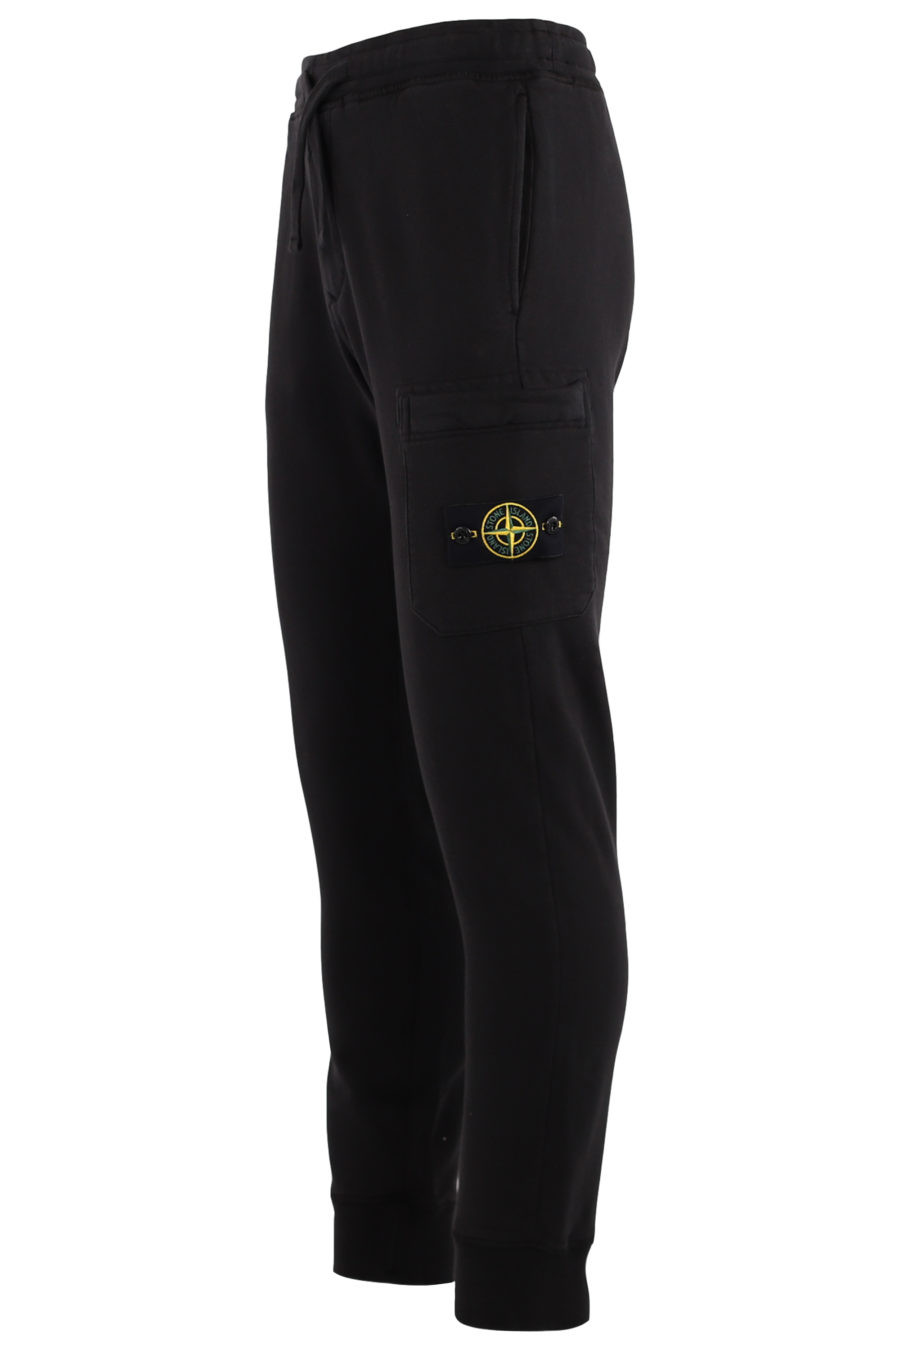 Black tracksuit bottoms with patch - d88df76ab01f90c760bbe8b7f2f93054a5123ff4